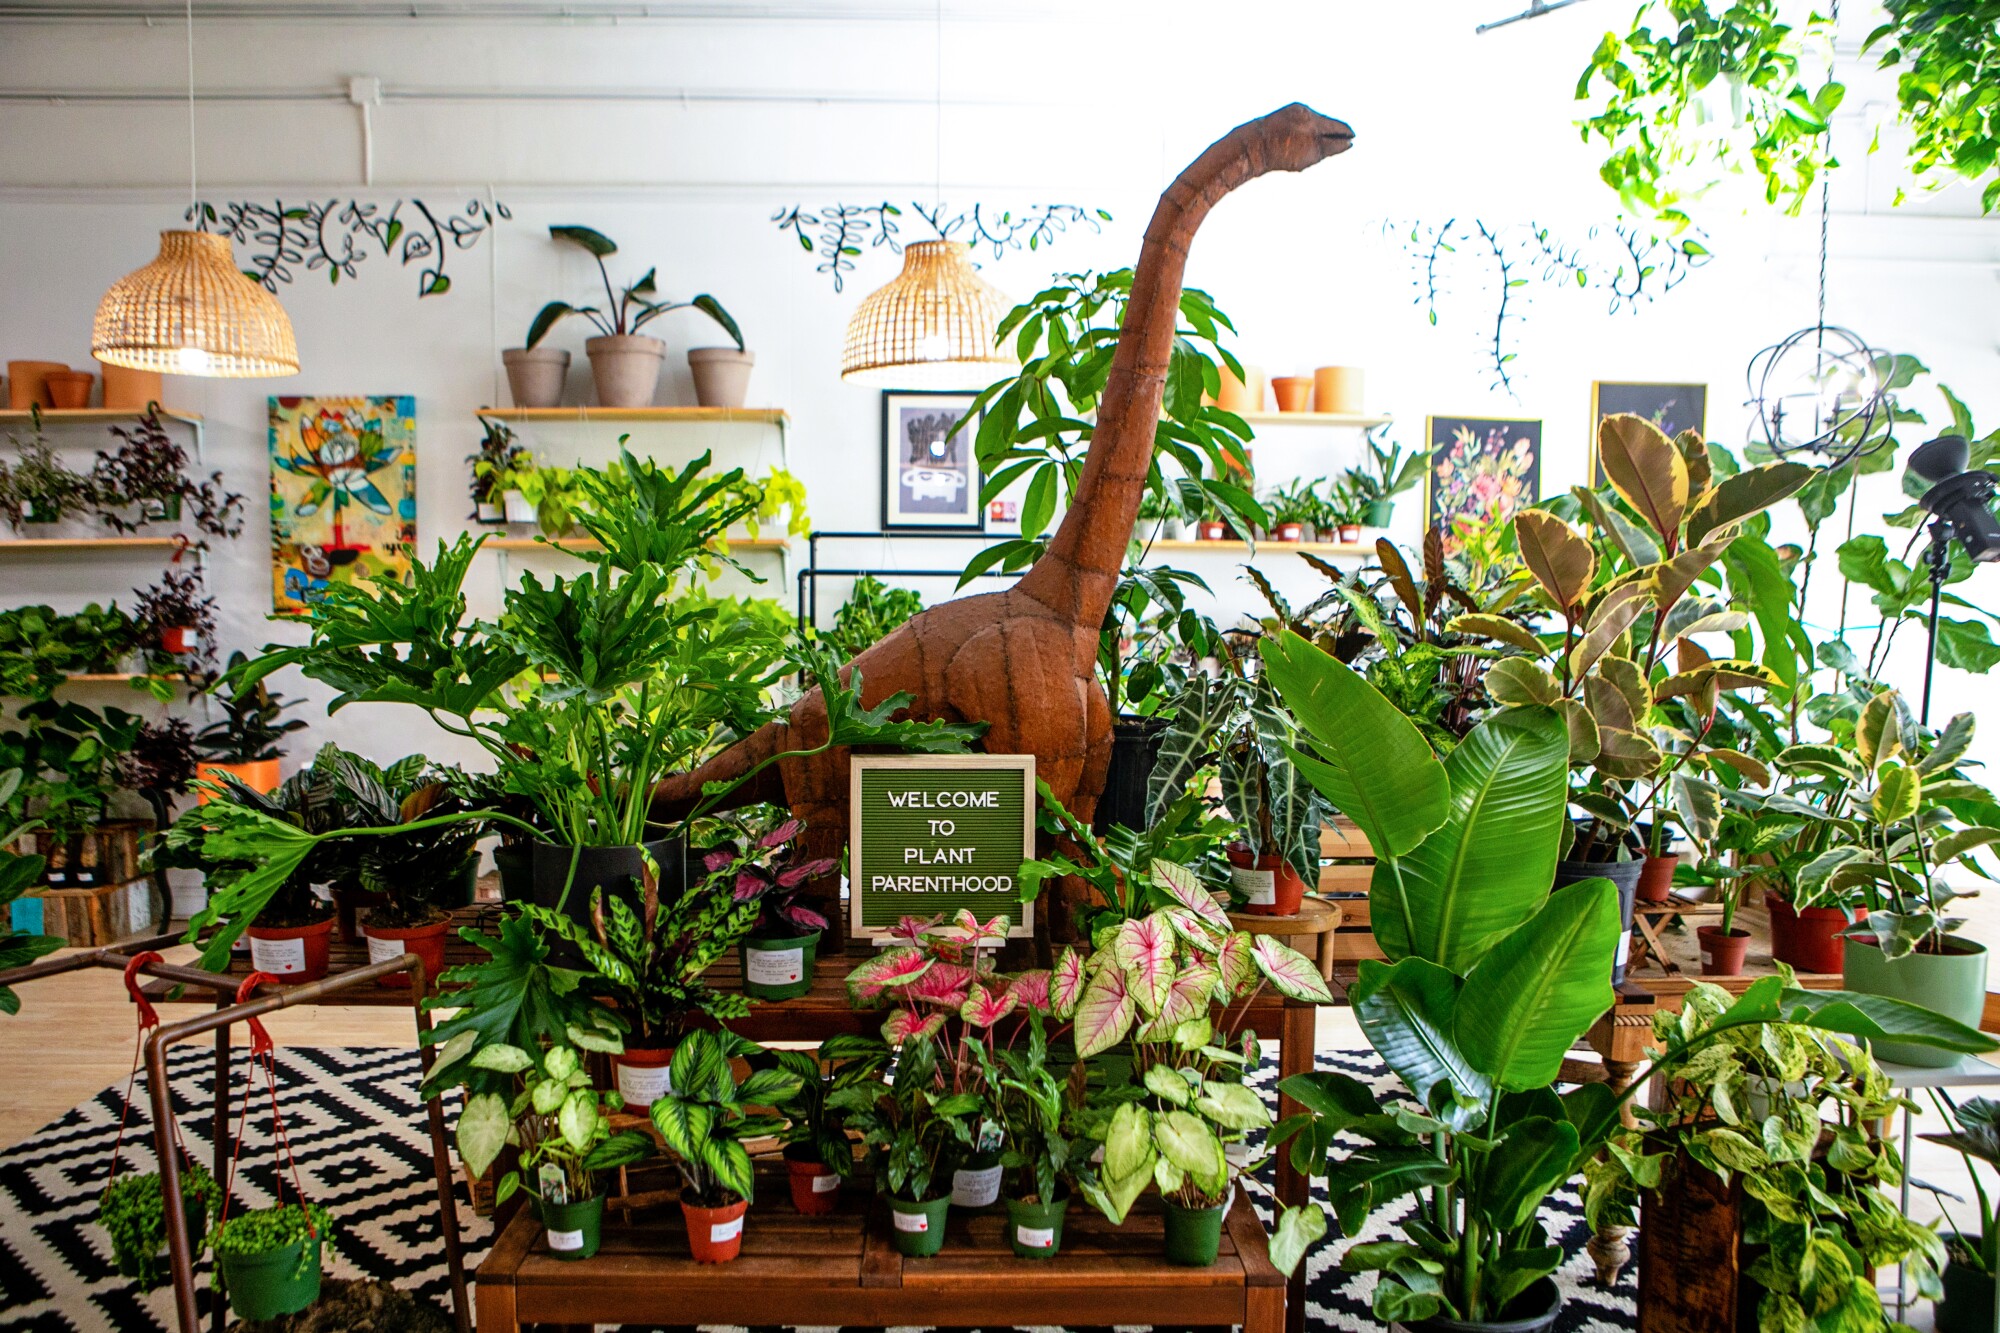 Indoors, a Brachiosaurus sculpture towers above a group of potted plants.